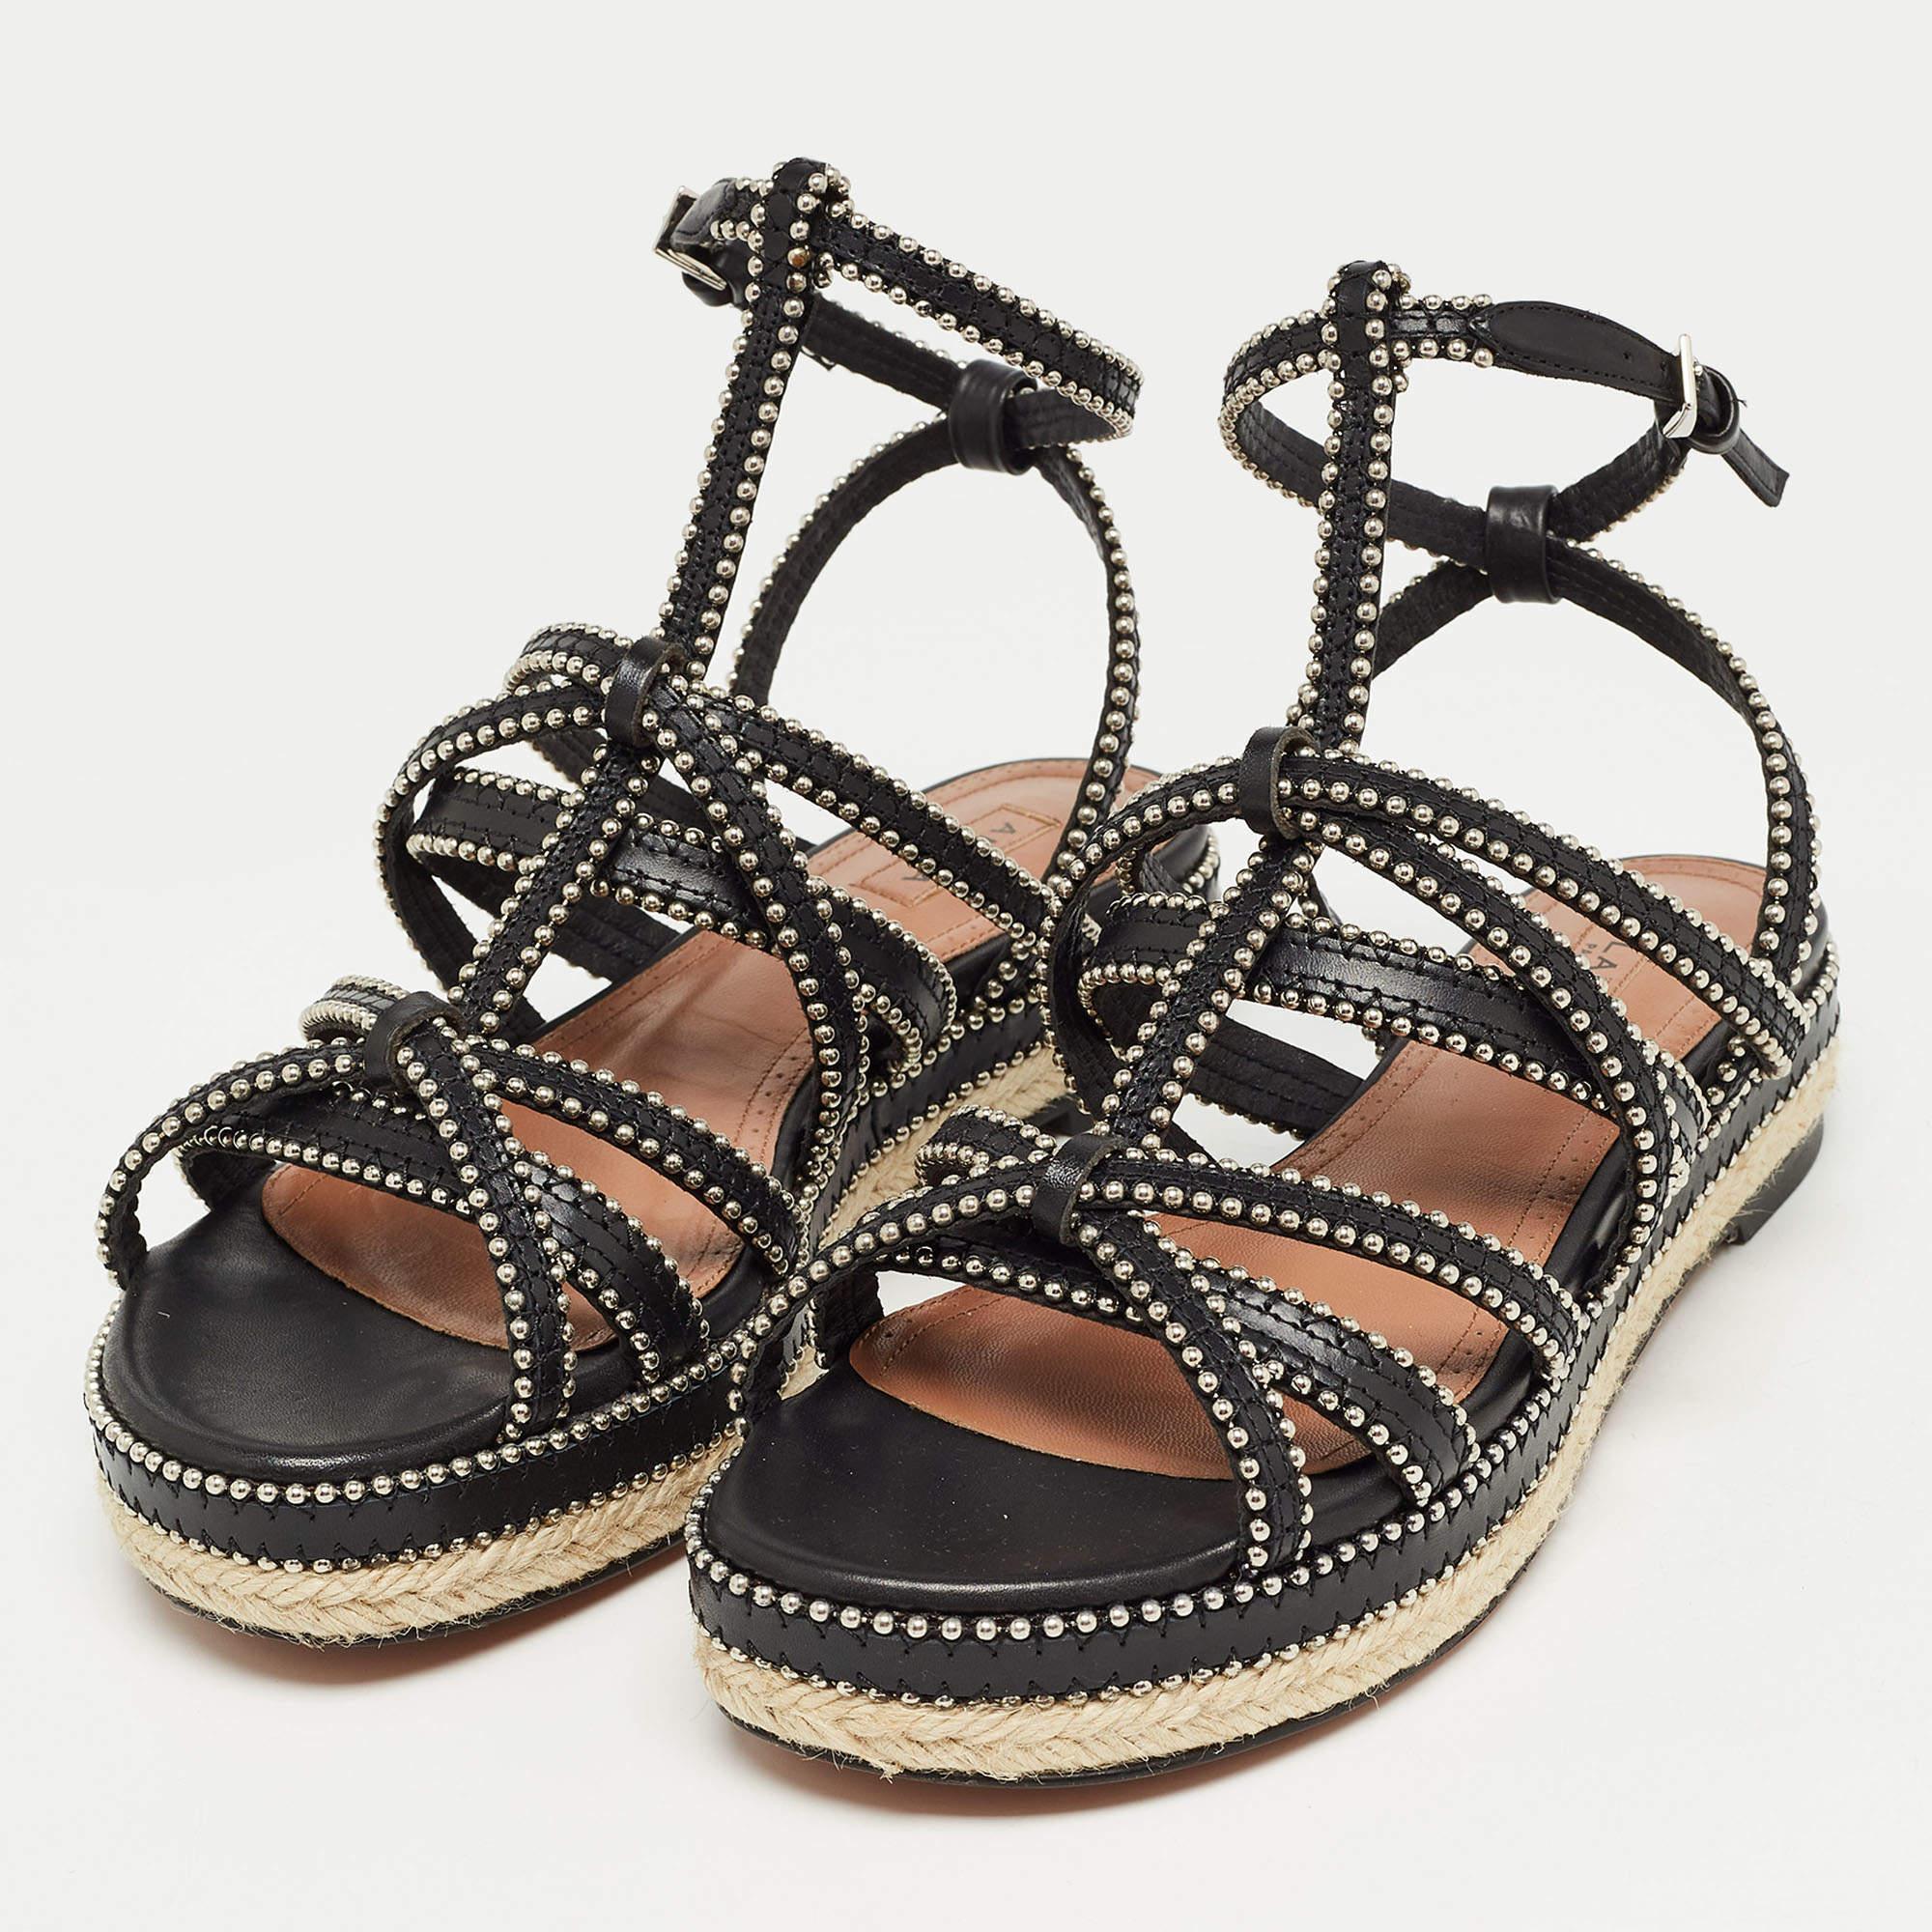 Alaia Black Leather Studded Strappy Espadrille Flat Sandals Size 37 For Sale 3